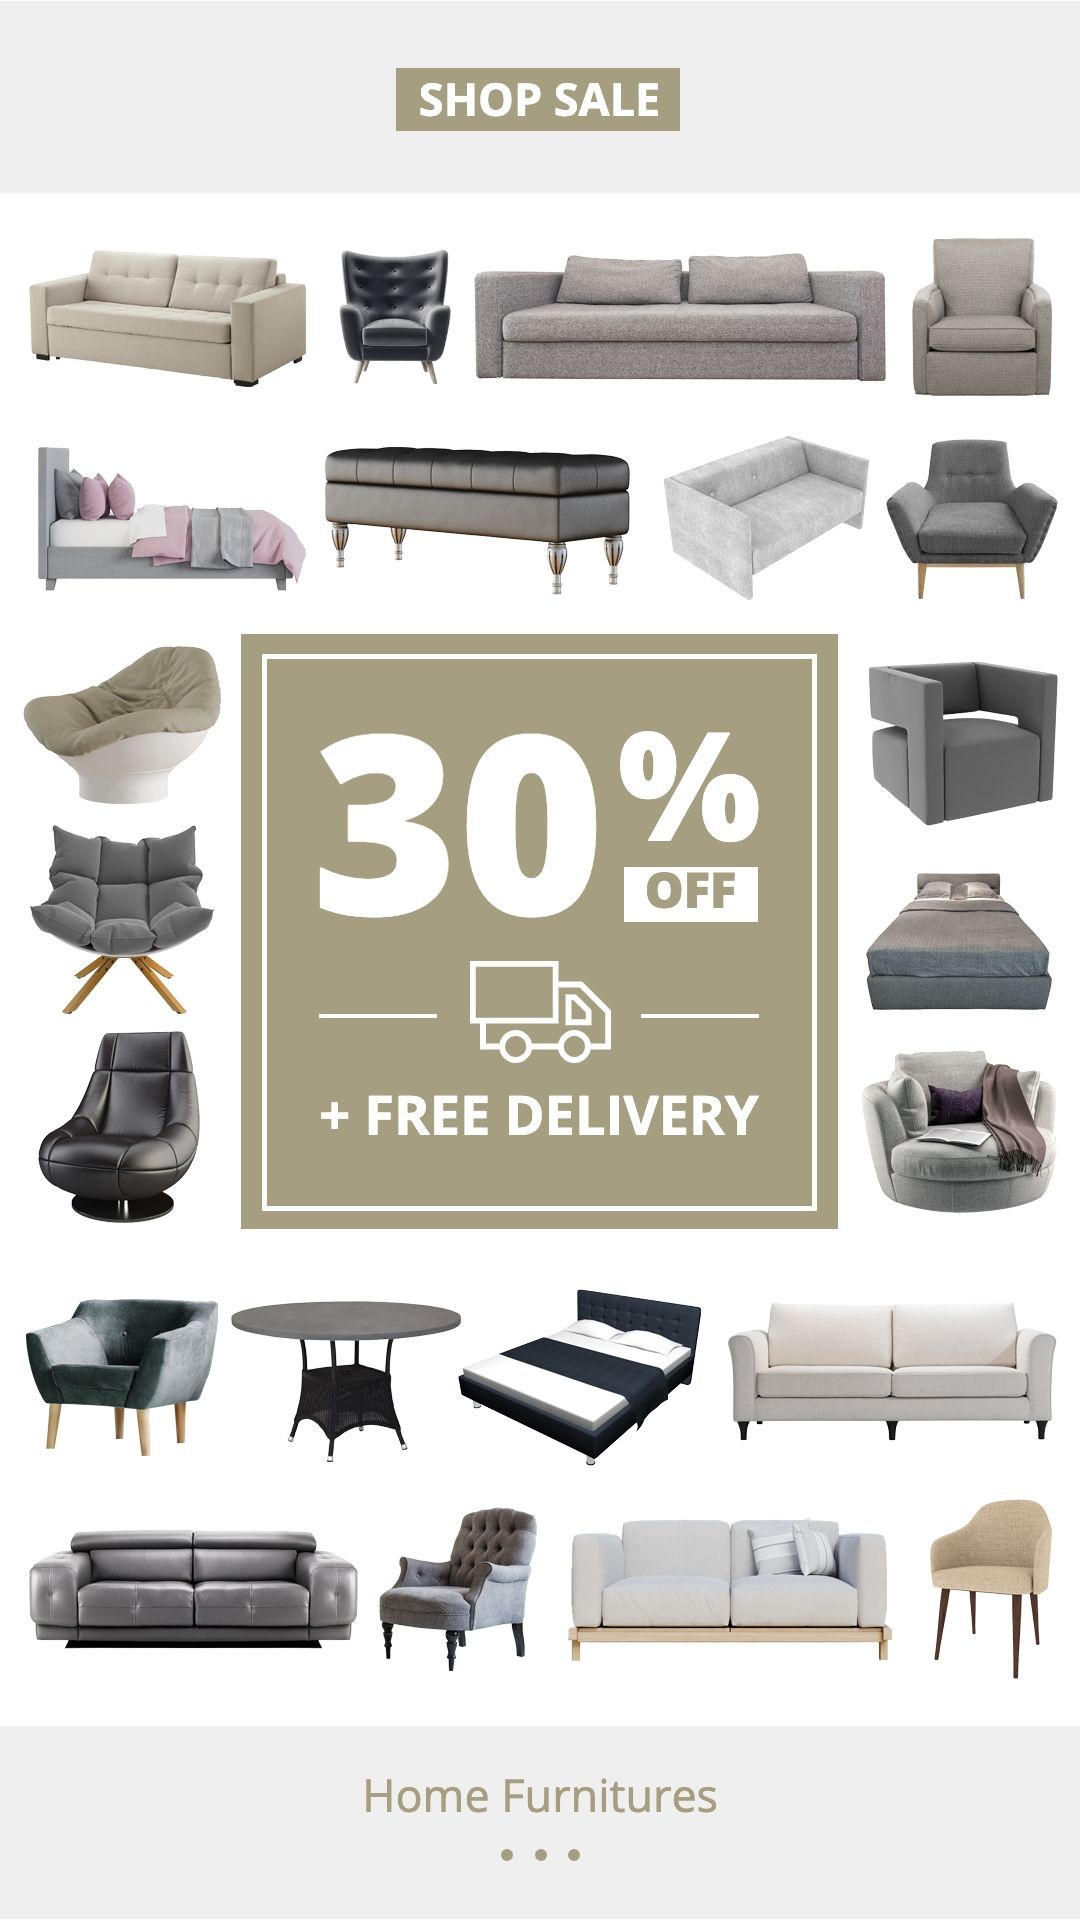 Free Delivery Day Home Furniture Sale Promotion Ecommerce Story预览效果